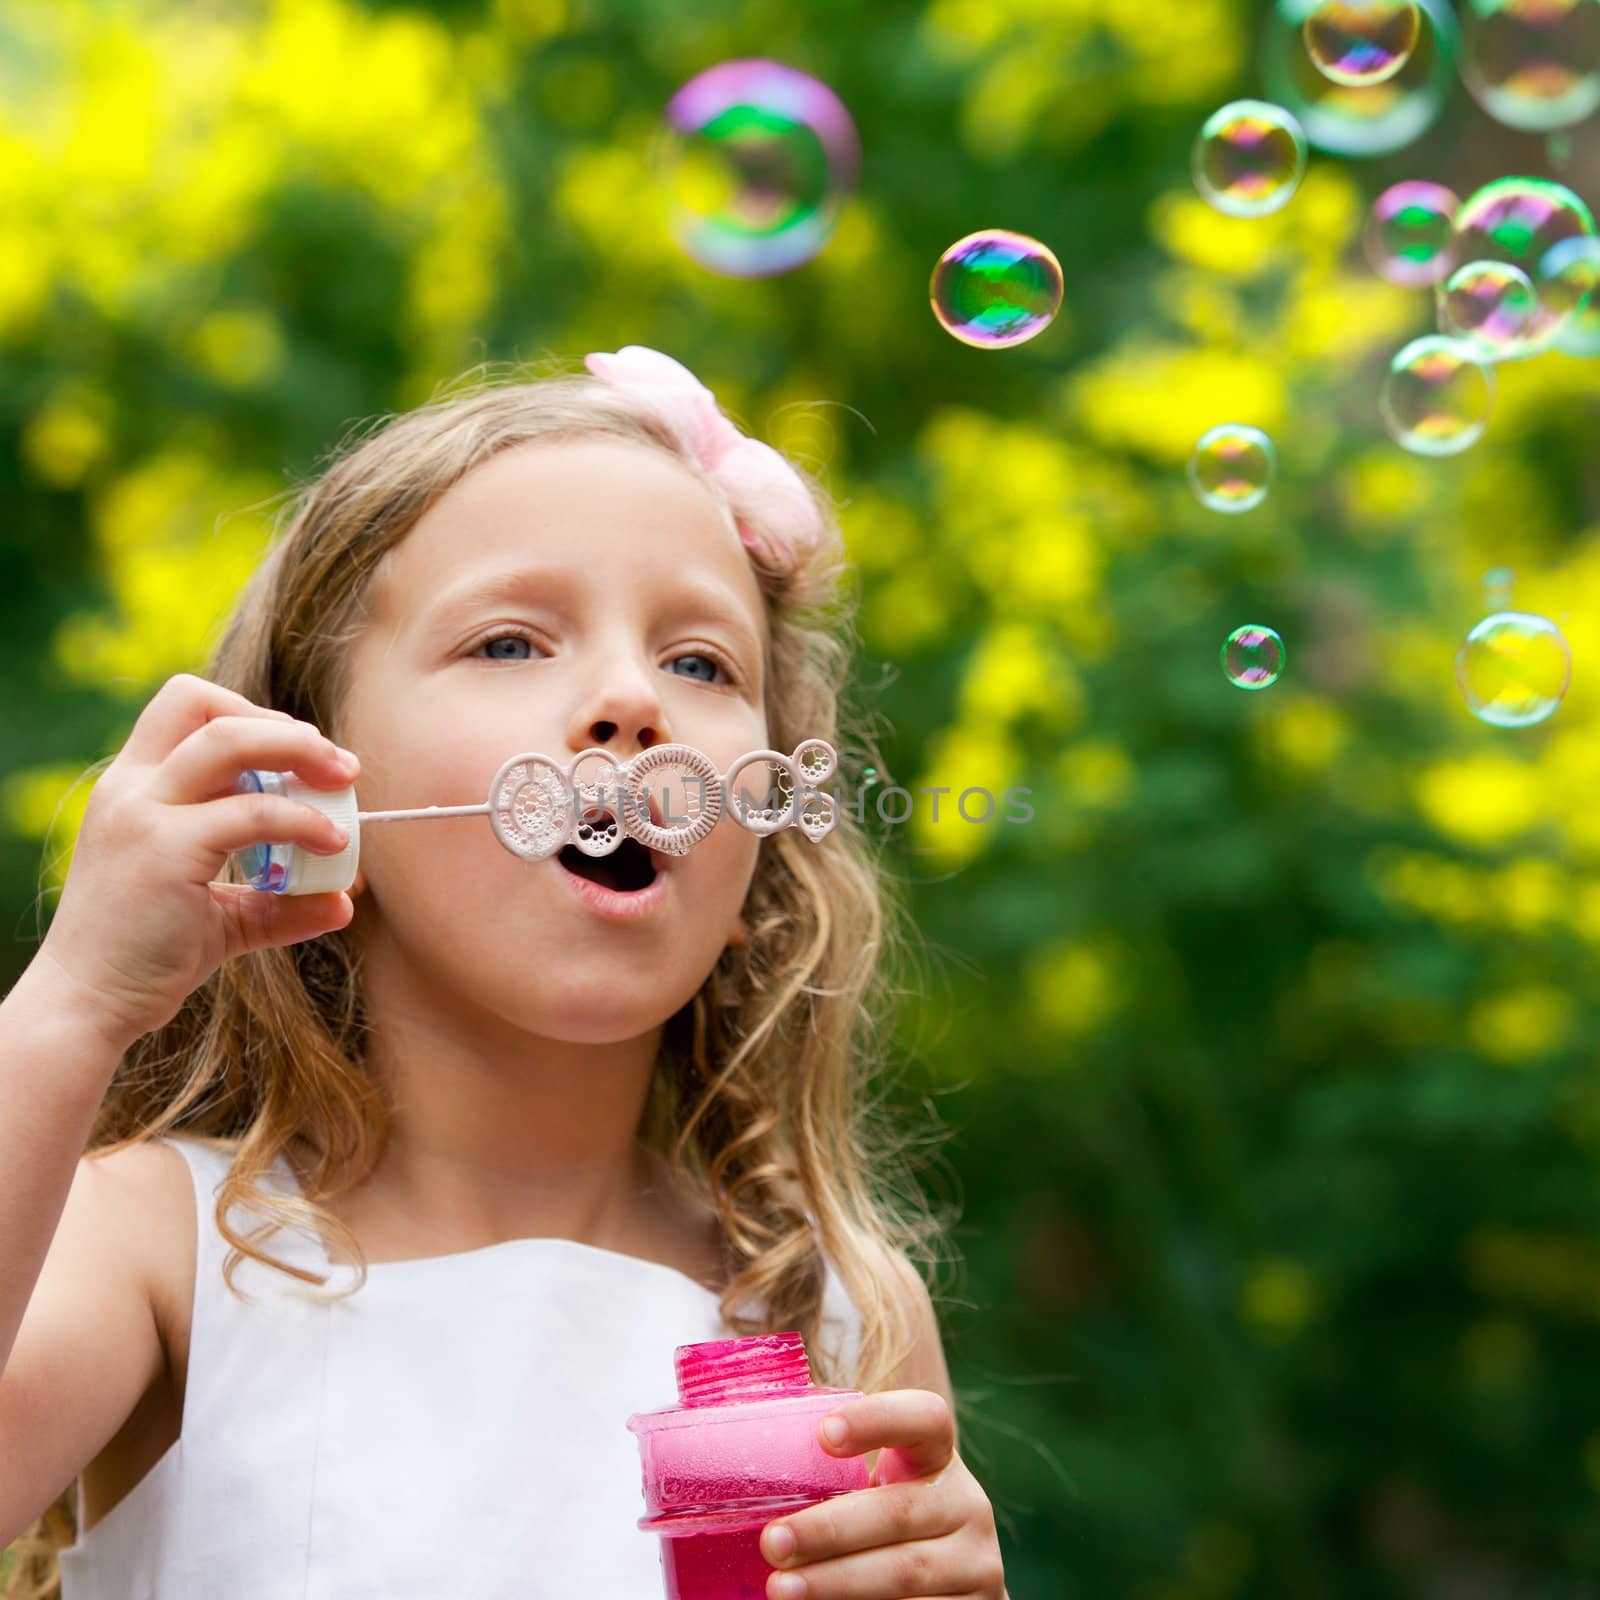 Close up of cute little girl blowing bubbles outdoors.